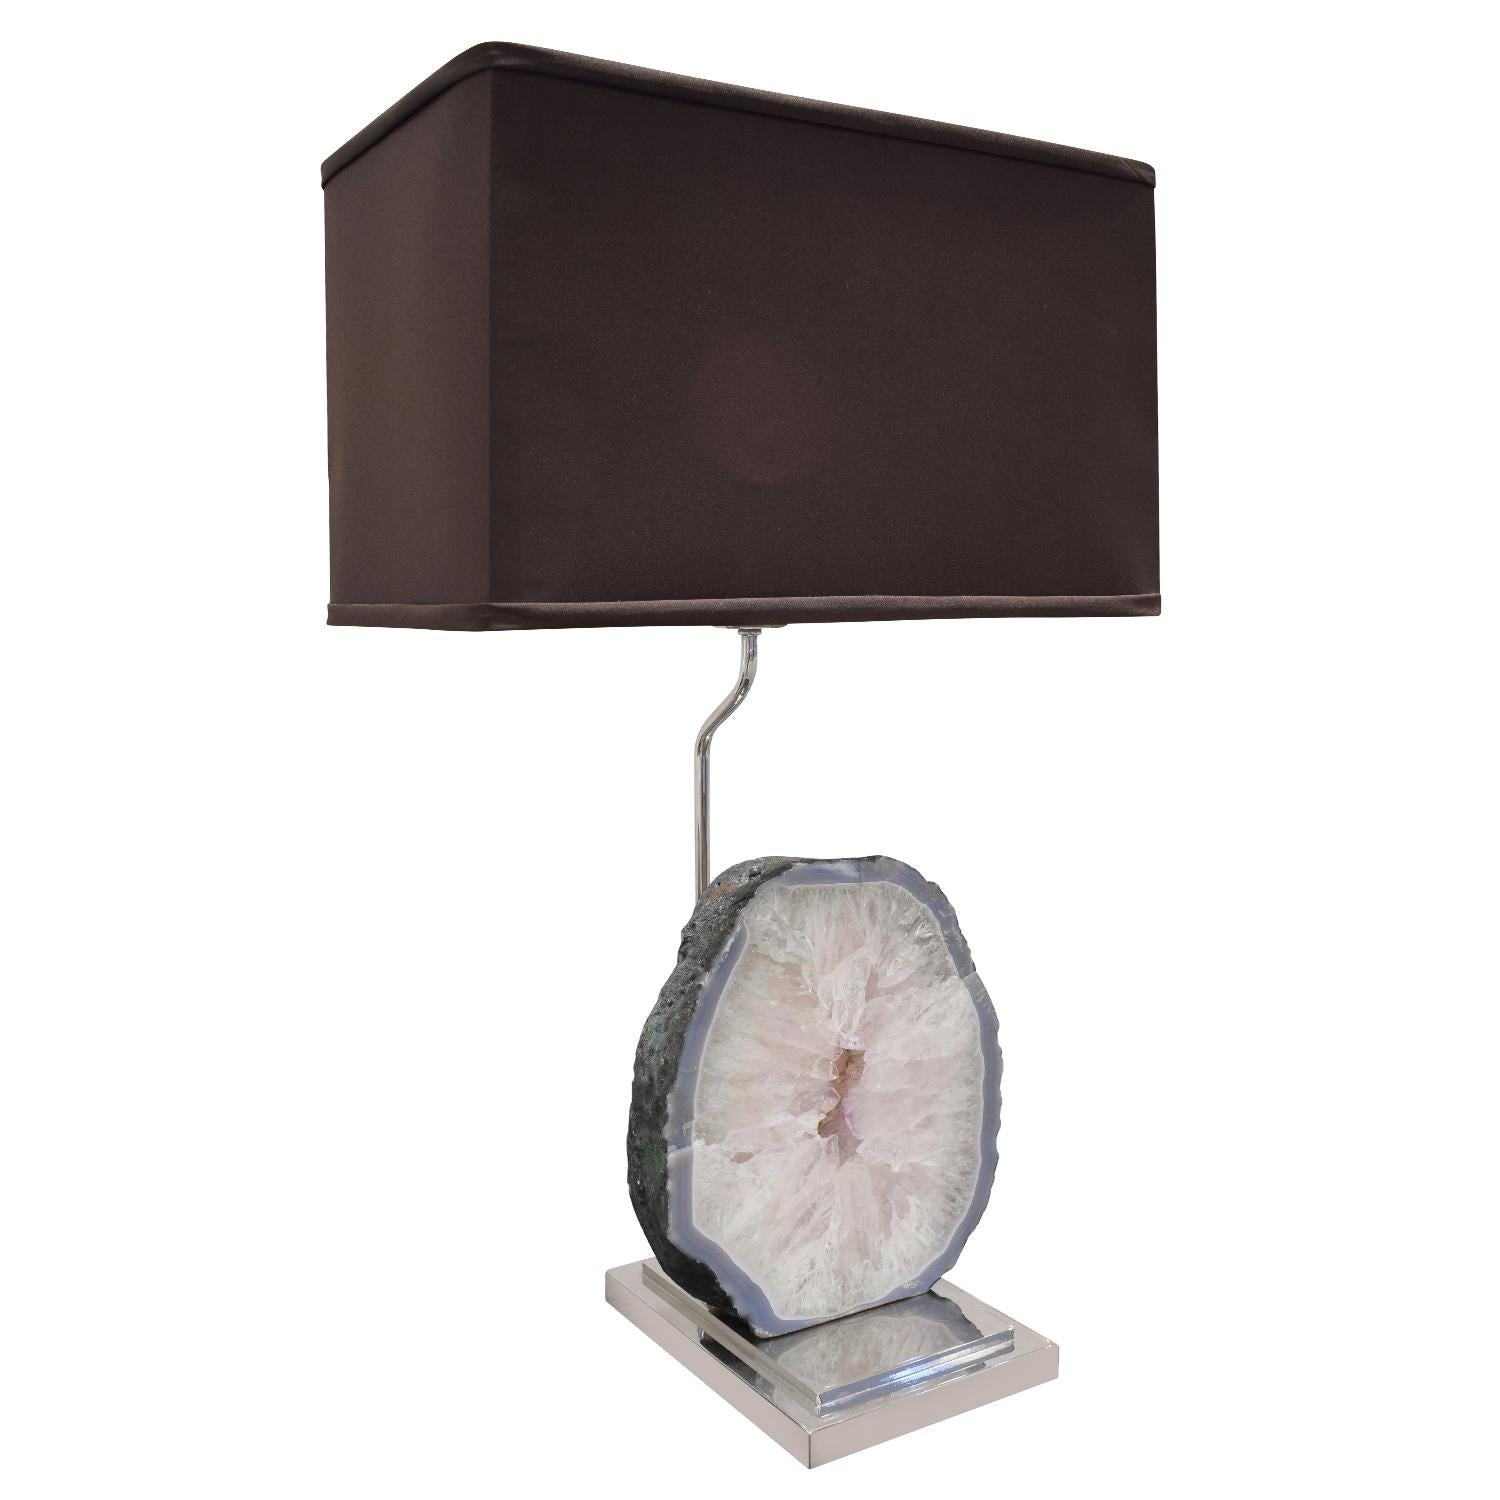 Table lamp in chrome with polished slab of stunning quartz sitting on pedestal base, American, 1970's. The mixture of metal with the polished quartz is very chic.

Measures: Shade W 16.5 inches
Shade D 9.5 inches.